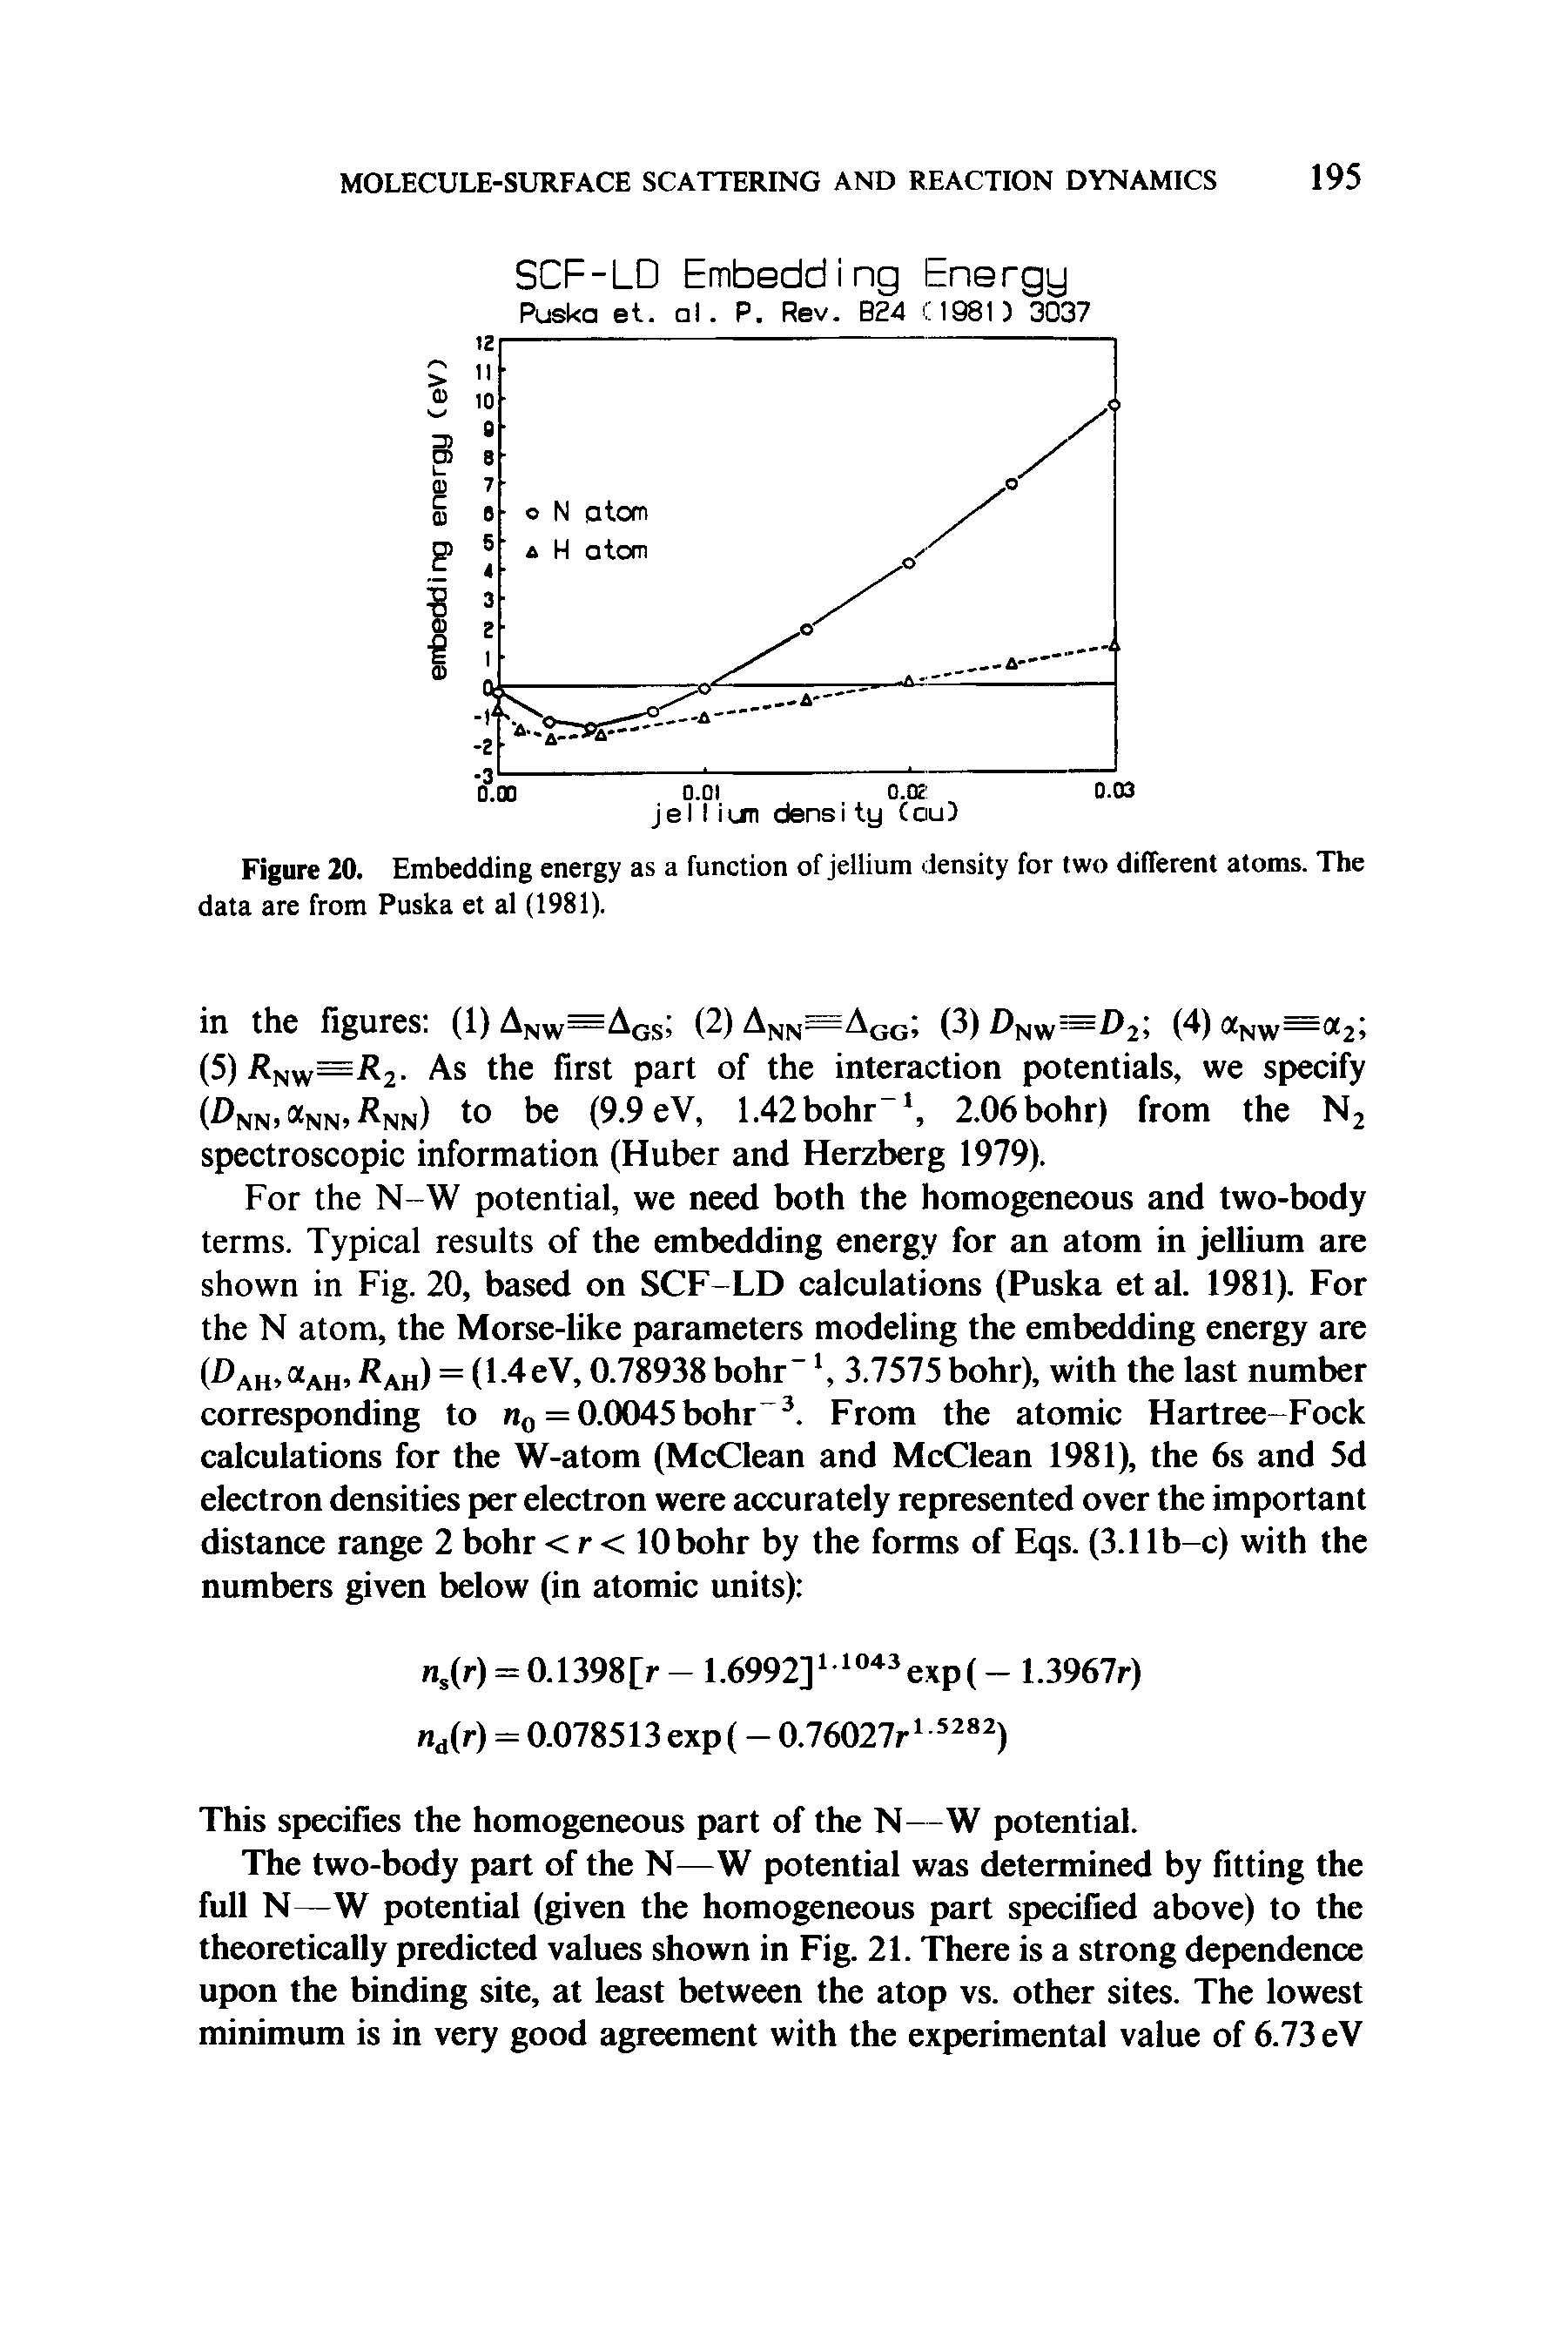 Figure 20. Embedding energy as a function of jellium density for two different atoms. The data are from Puska et al (1981).